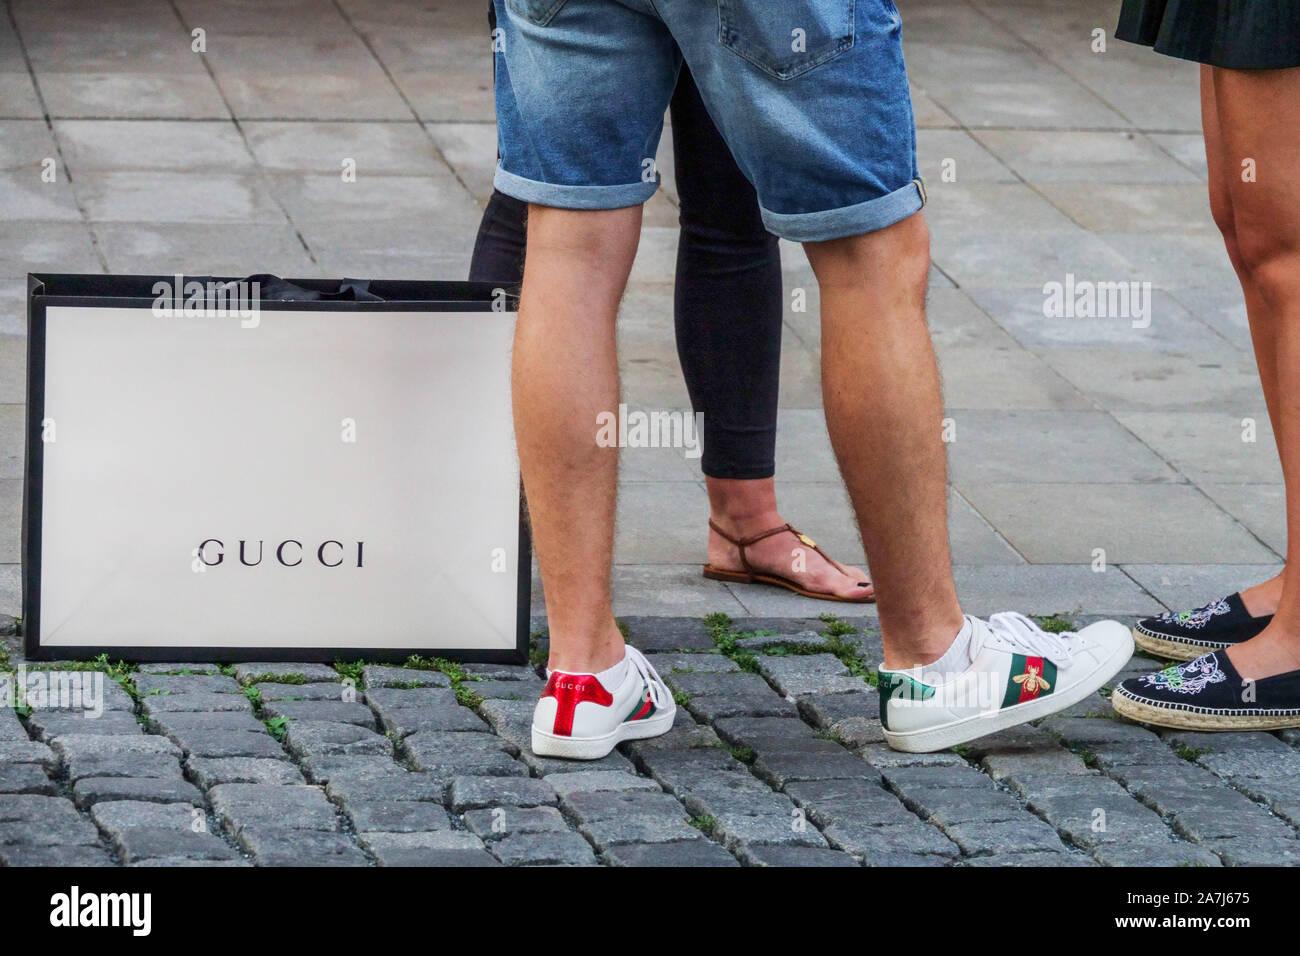 gucci shoes with shorts